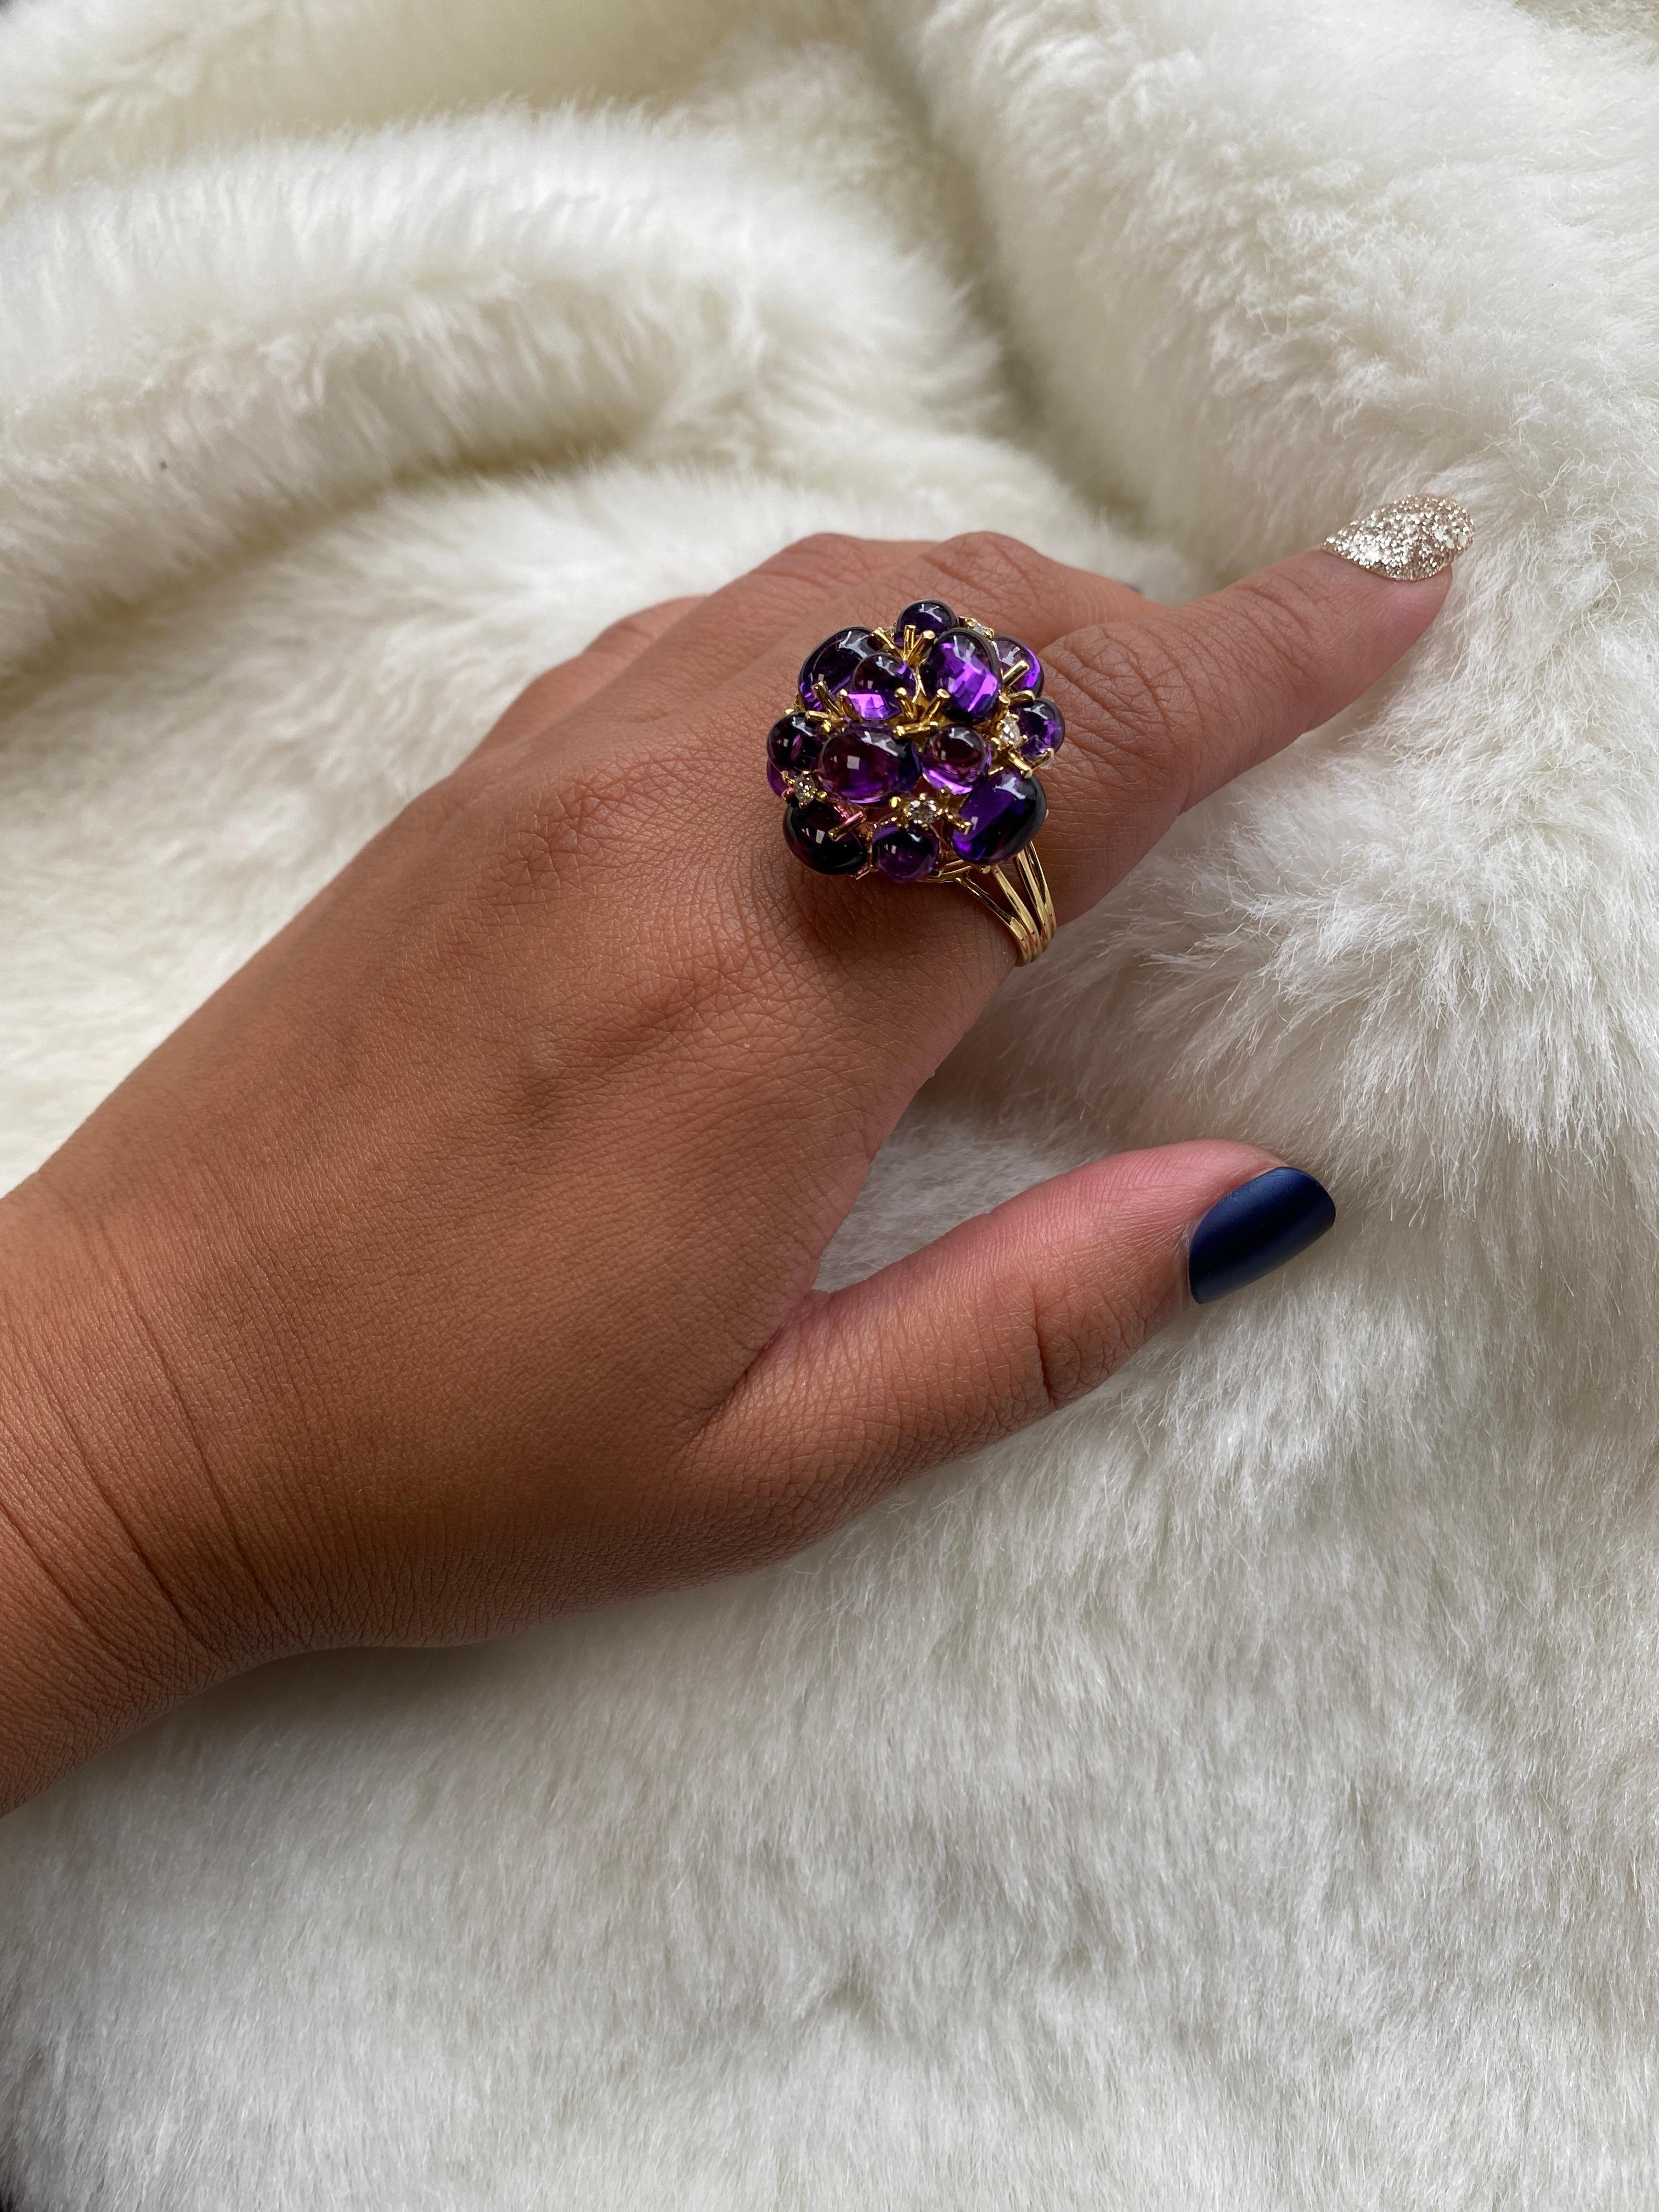 Amethyst Oval and Round Cabochon Ring in 18K Yellow Gold with Diamonds, from 'Rock 'N Roll' Collection. Extensive collection of big and bold pieces. Like the music, this Rock ‘n Roll collection is electric in color and very stimulating to the eye.